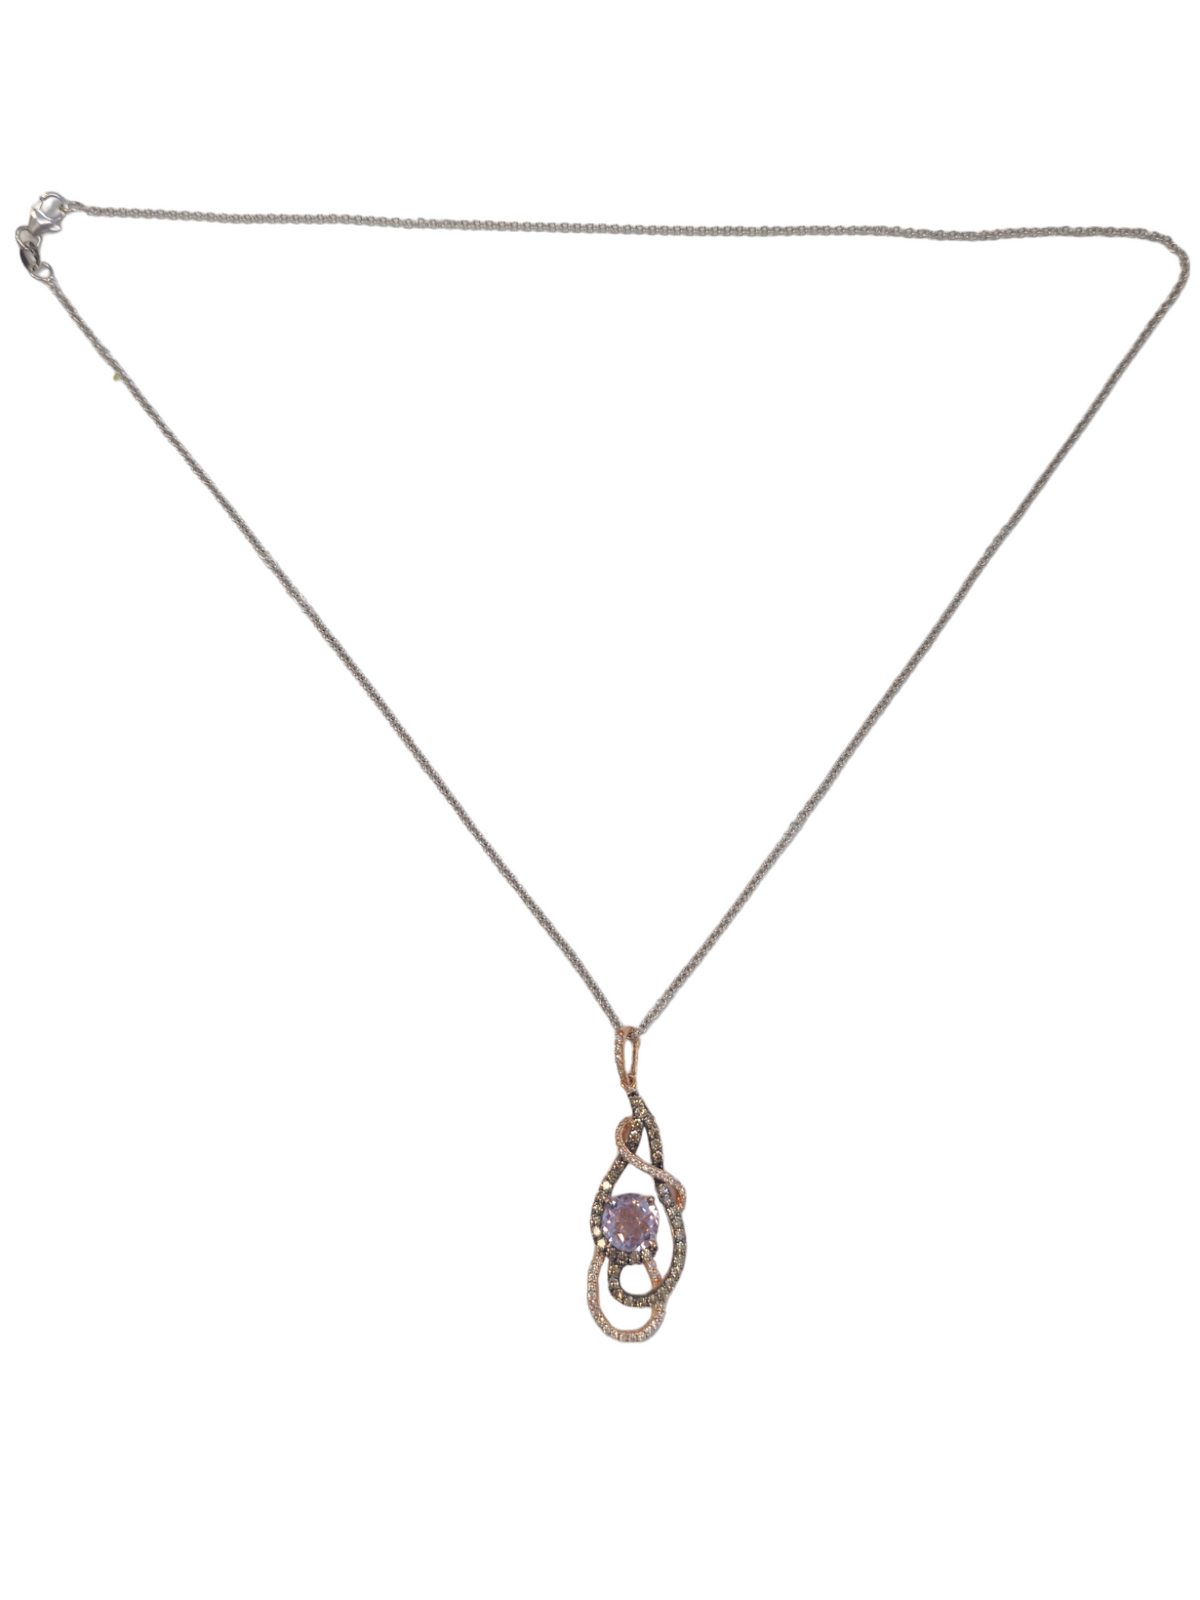 Le Vian Diamond pendant made in solid 14-karat rose gold with 14-karat white gold chain